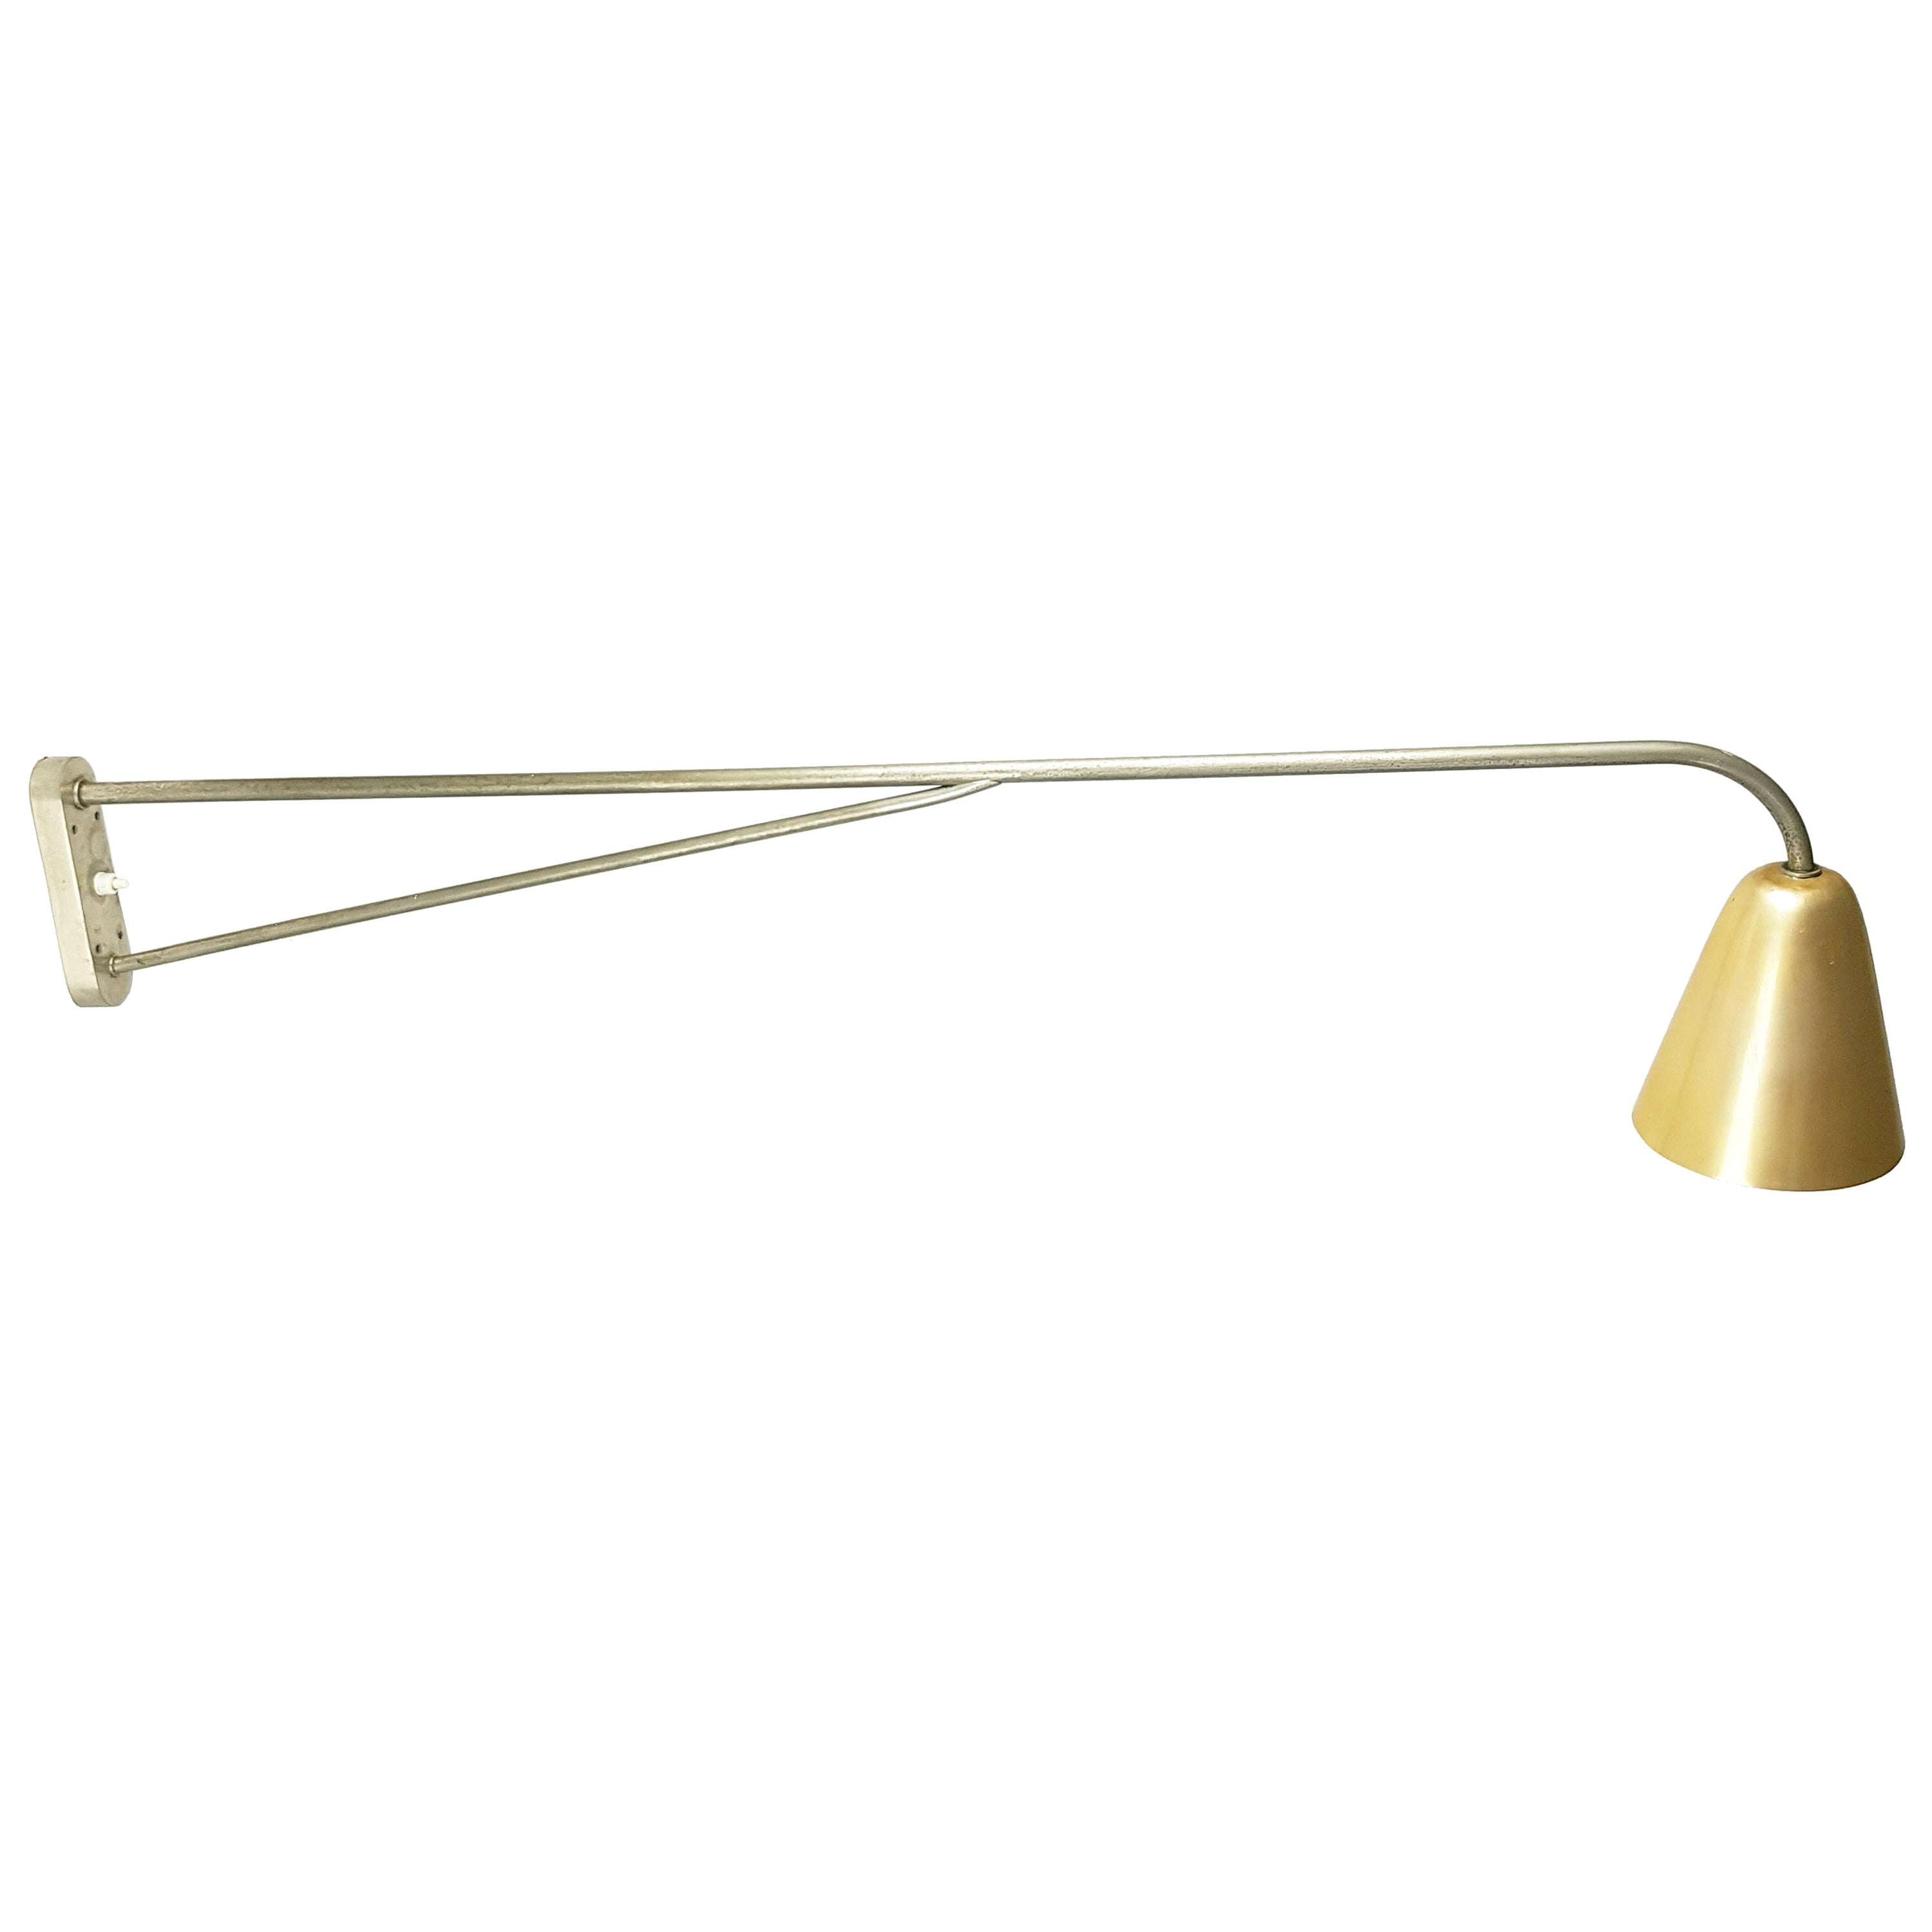 Anodized Aluminum & Nickel Plated Brass Rationalist Italian Wall Lamp, 1940s/50s For Sale